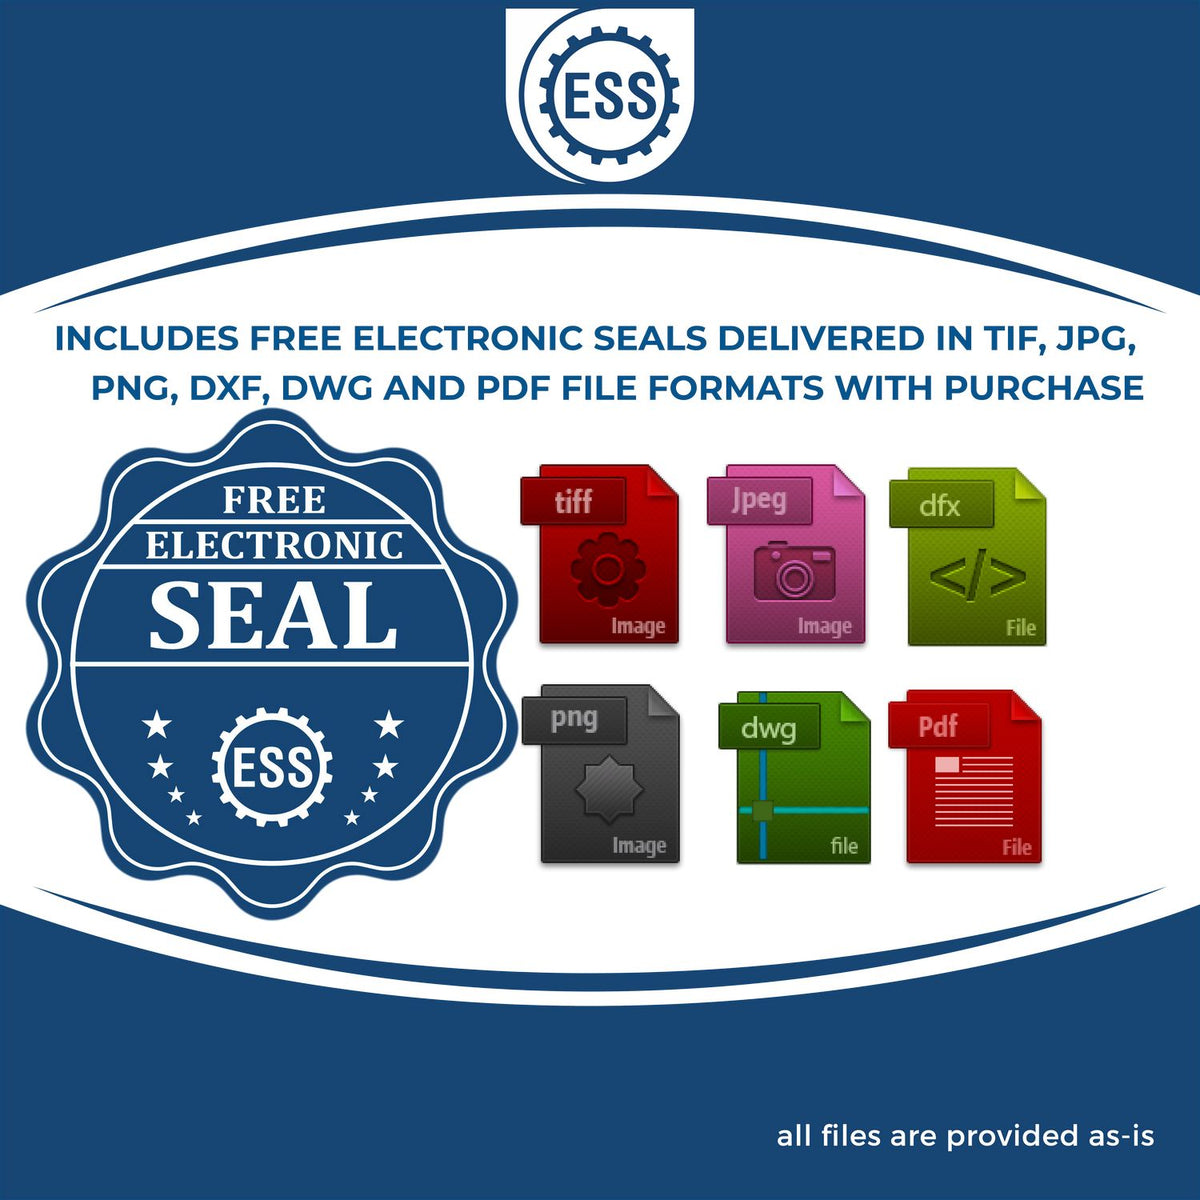 An infographic for the free electronic seal for the Premium MaxLight Pre-Inked Maryland Geology Stamp illustrating the different file type icons such as DXF, DWG, TIF, JPG and PNG.